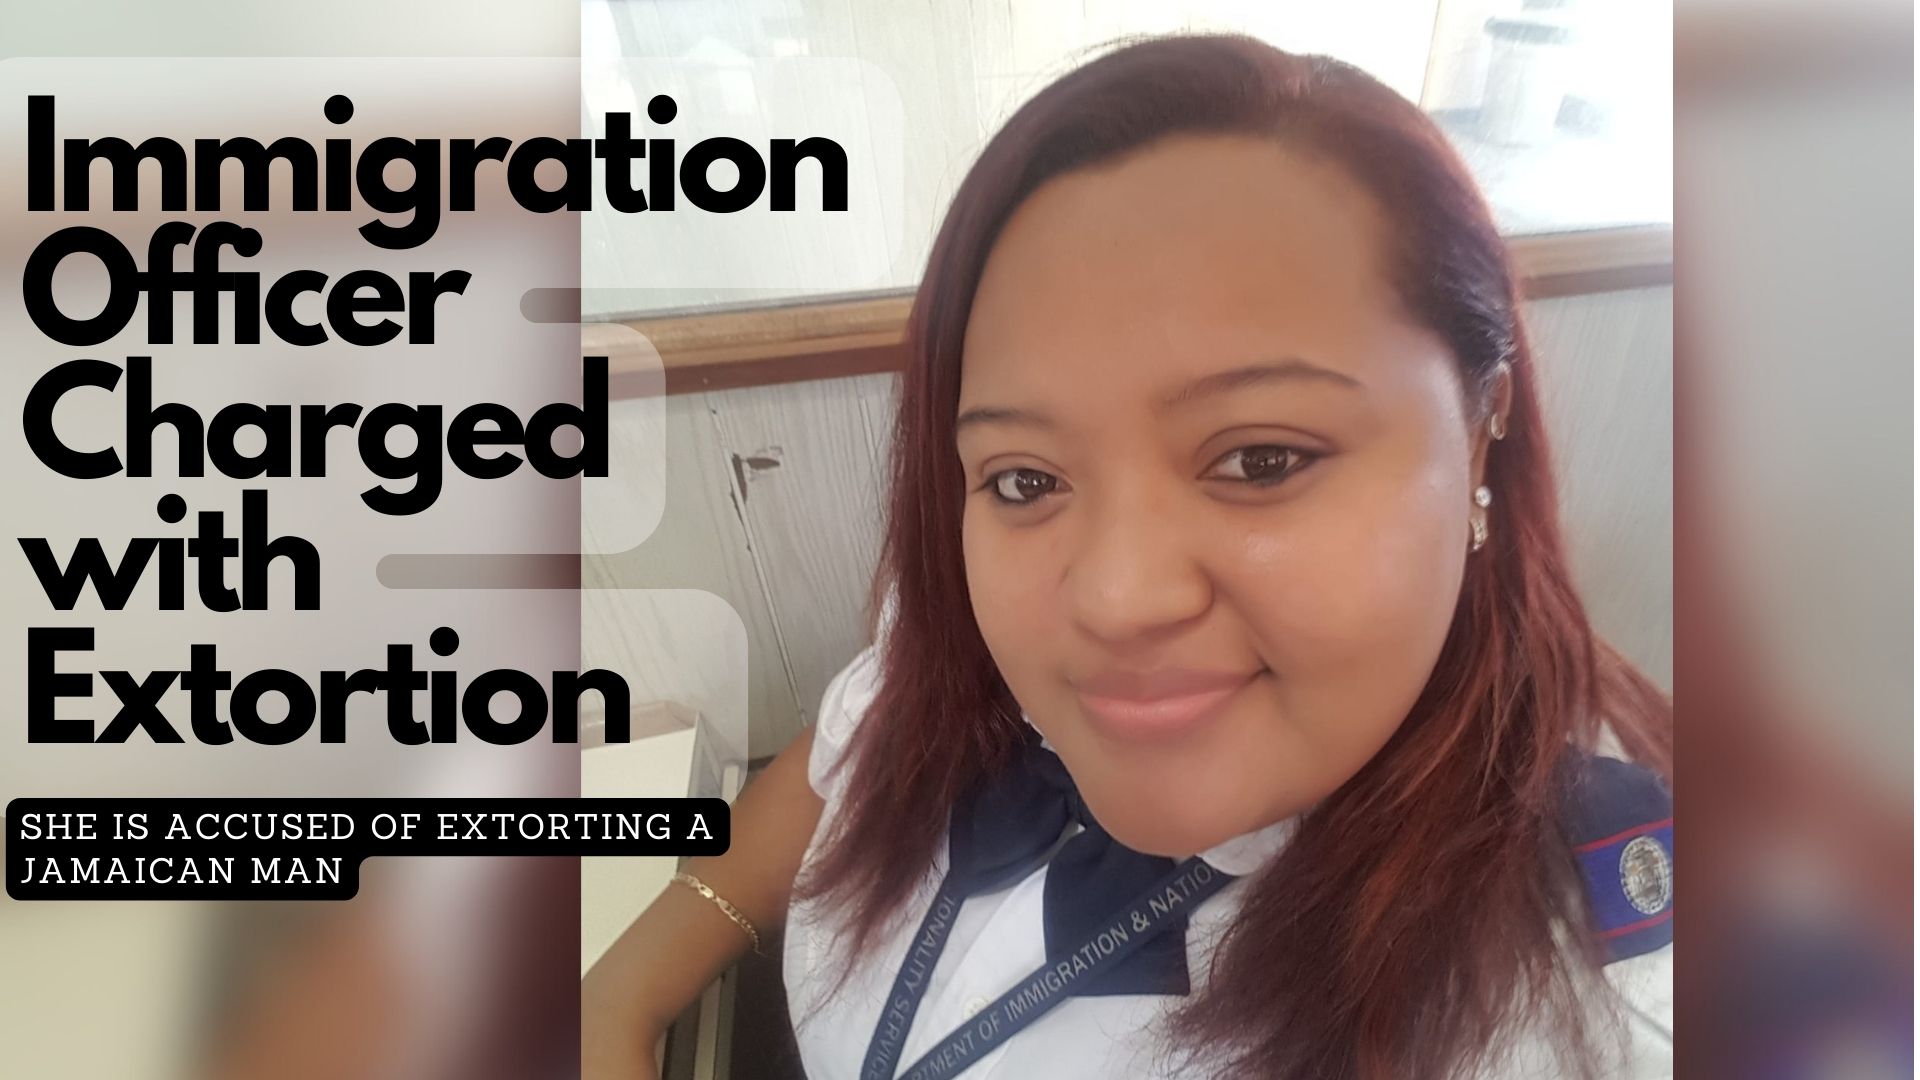 Immigration Officer Charged with Extortion